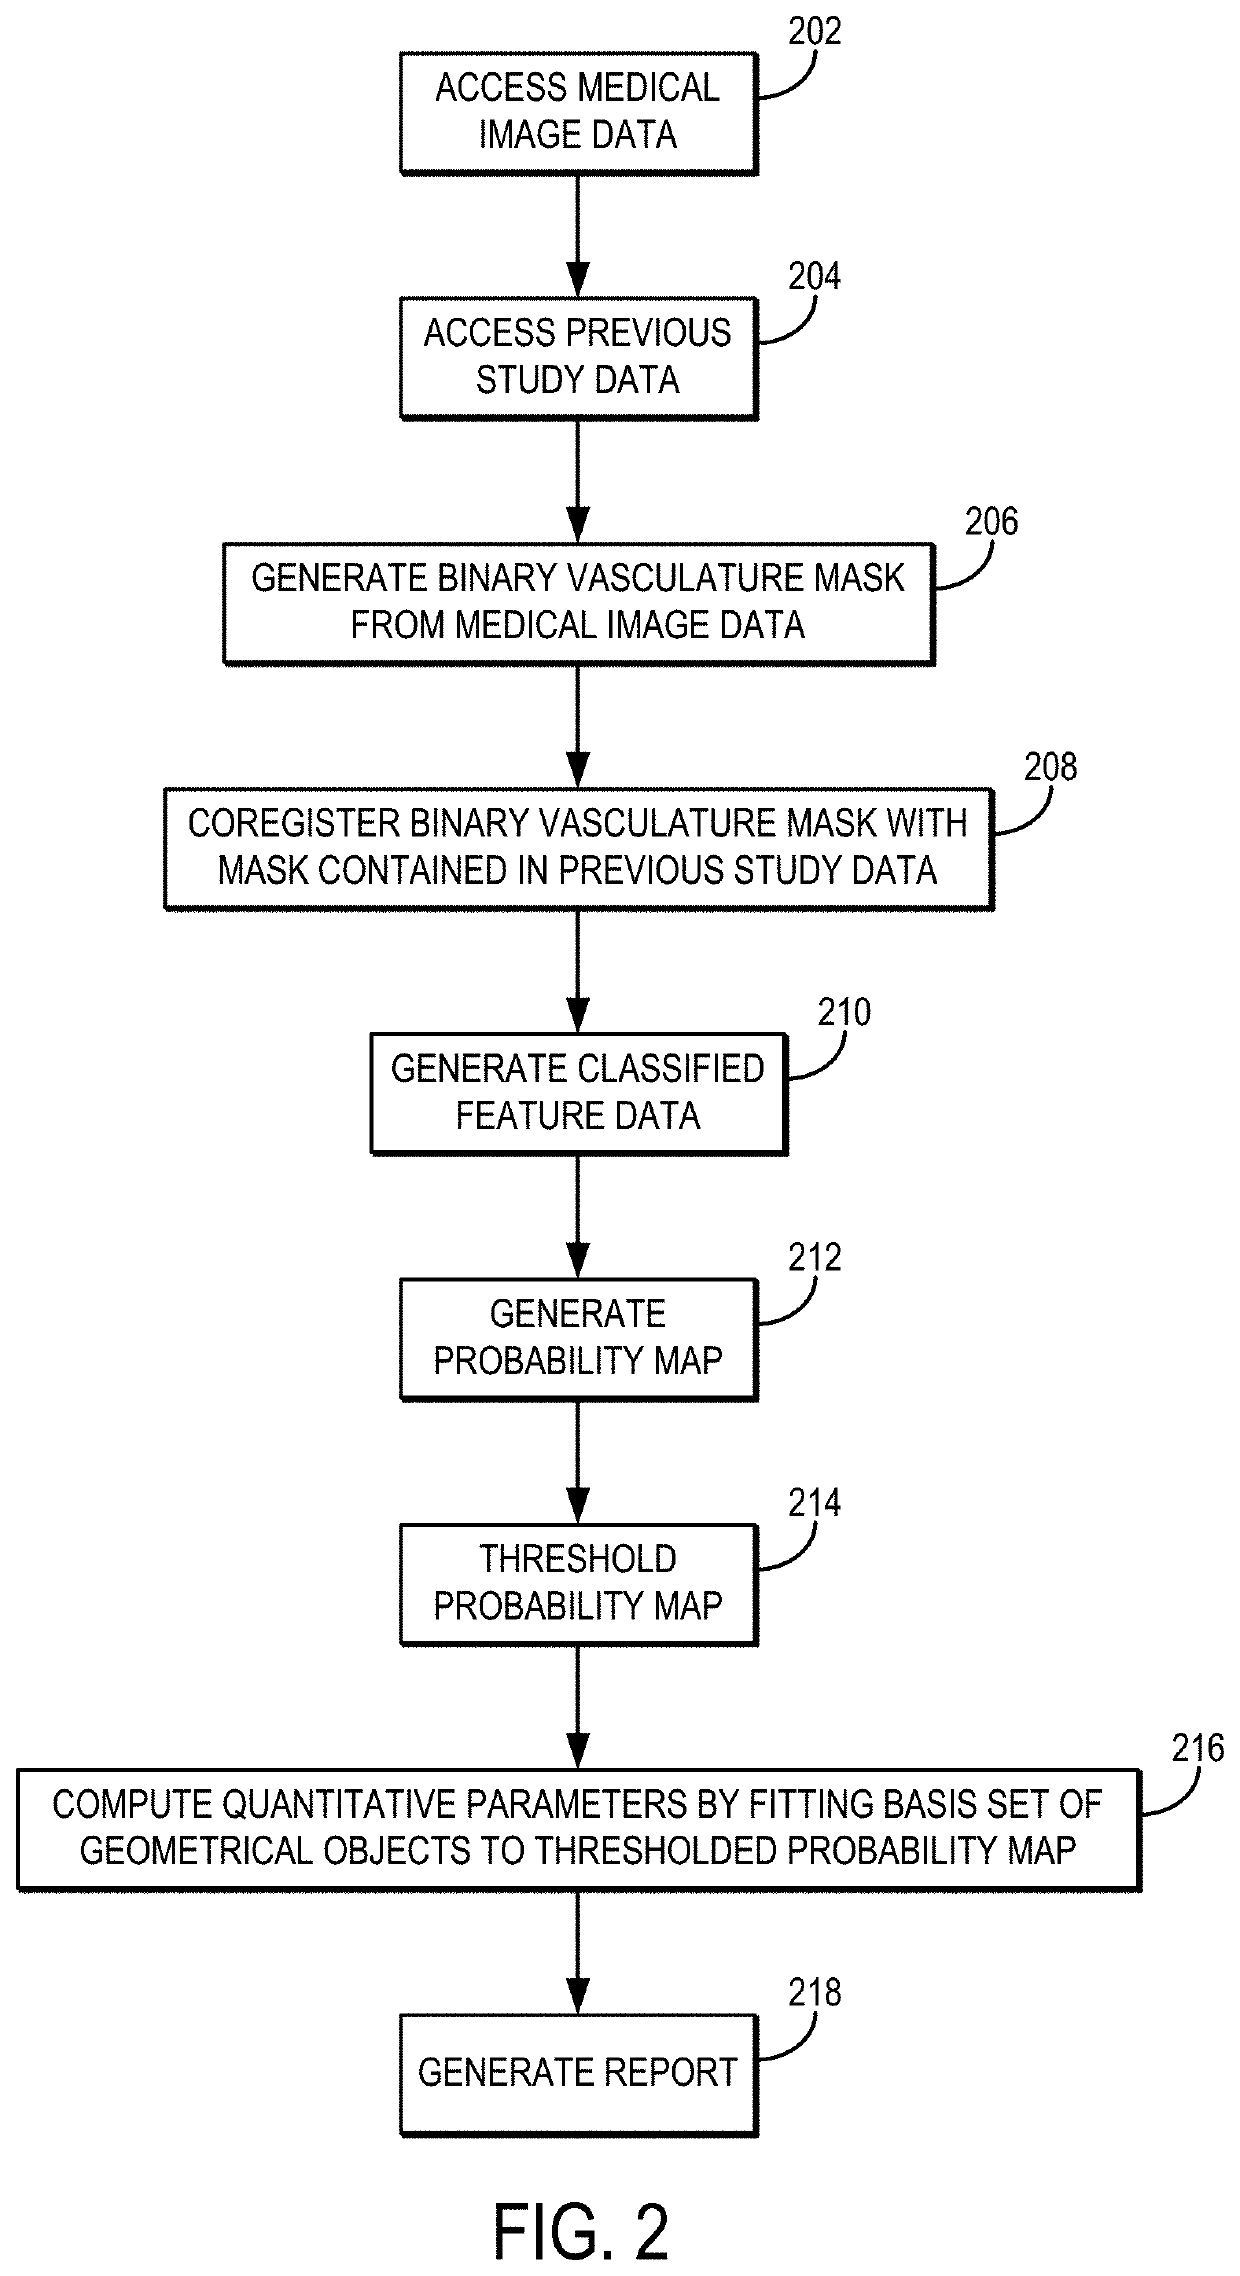 Systems and methods for generating classifying and quantitative analysis reports of aneurysms from medical image data